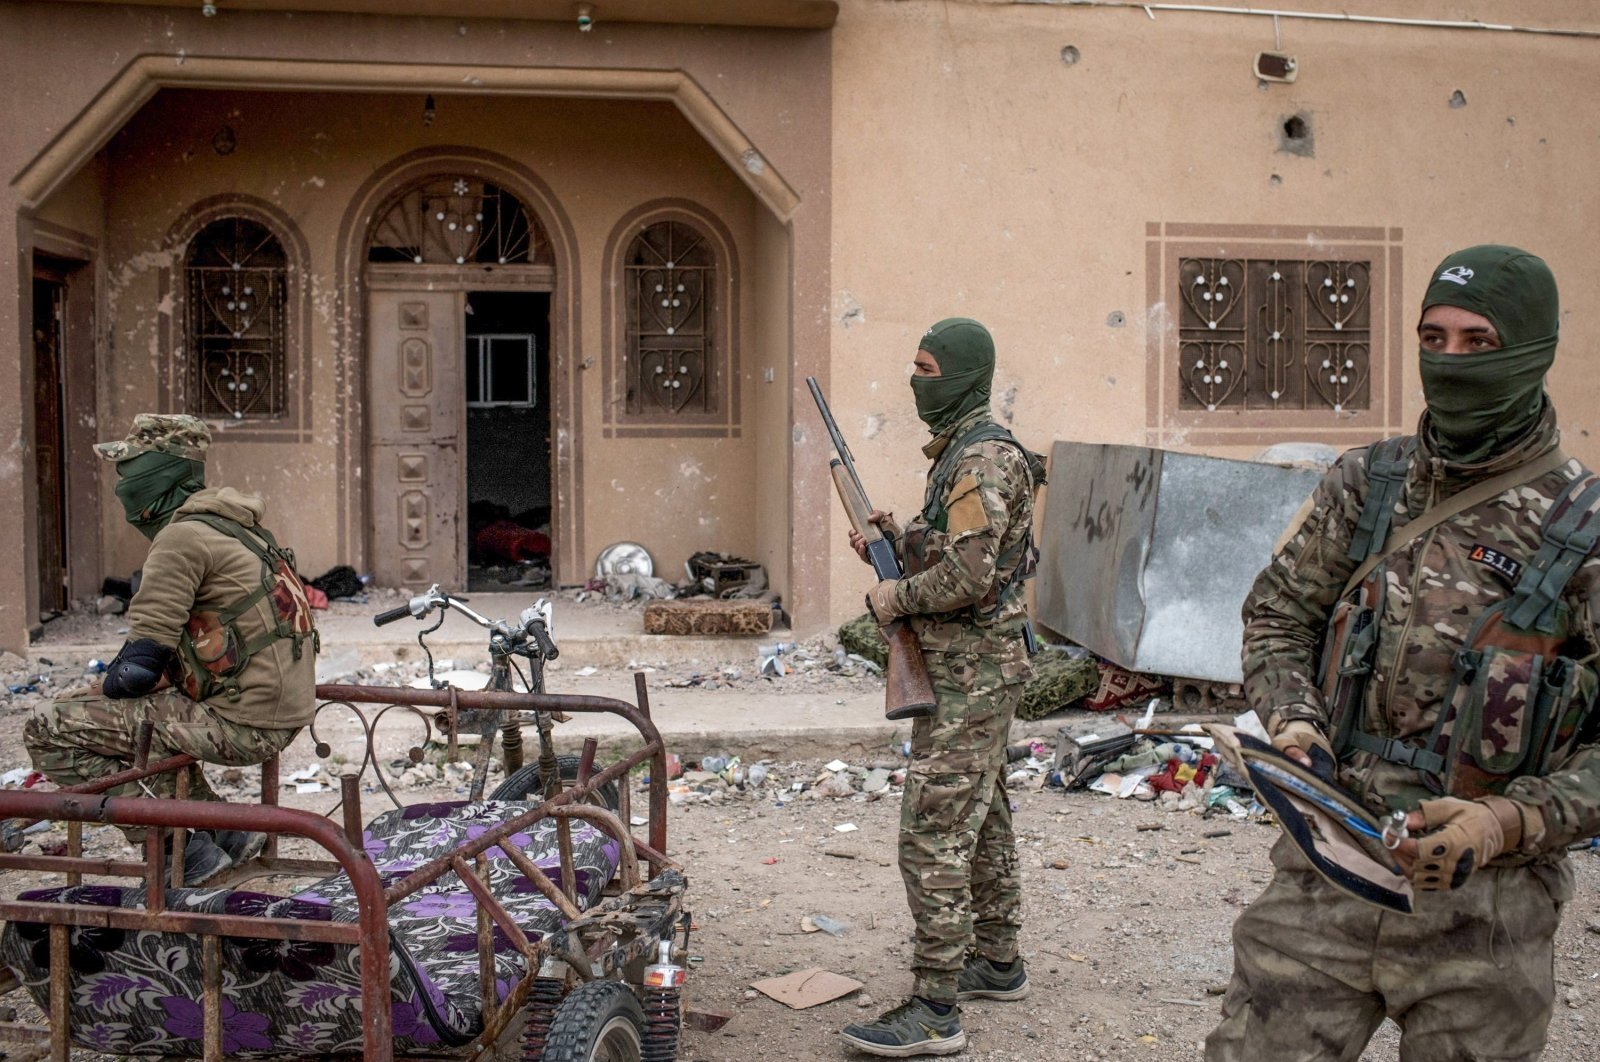 YPG/PKK terrorists are seen in front of a building in Baghouz, Syria, March 24, 2019. (Getty Images)